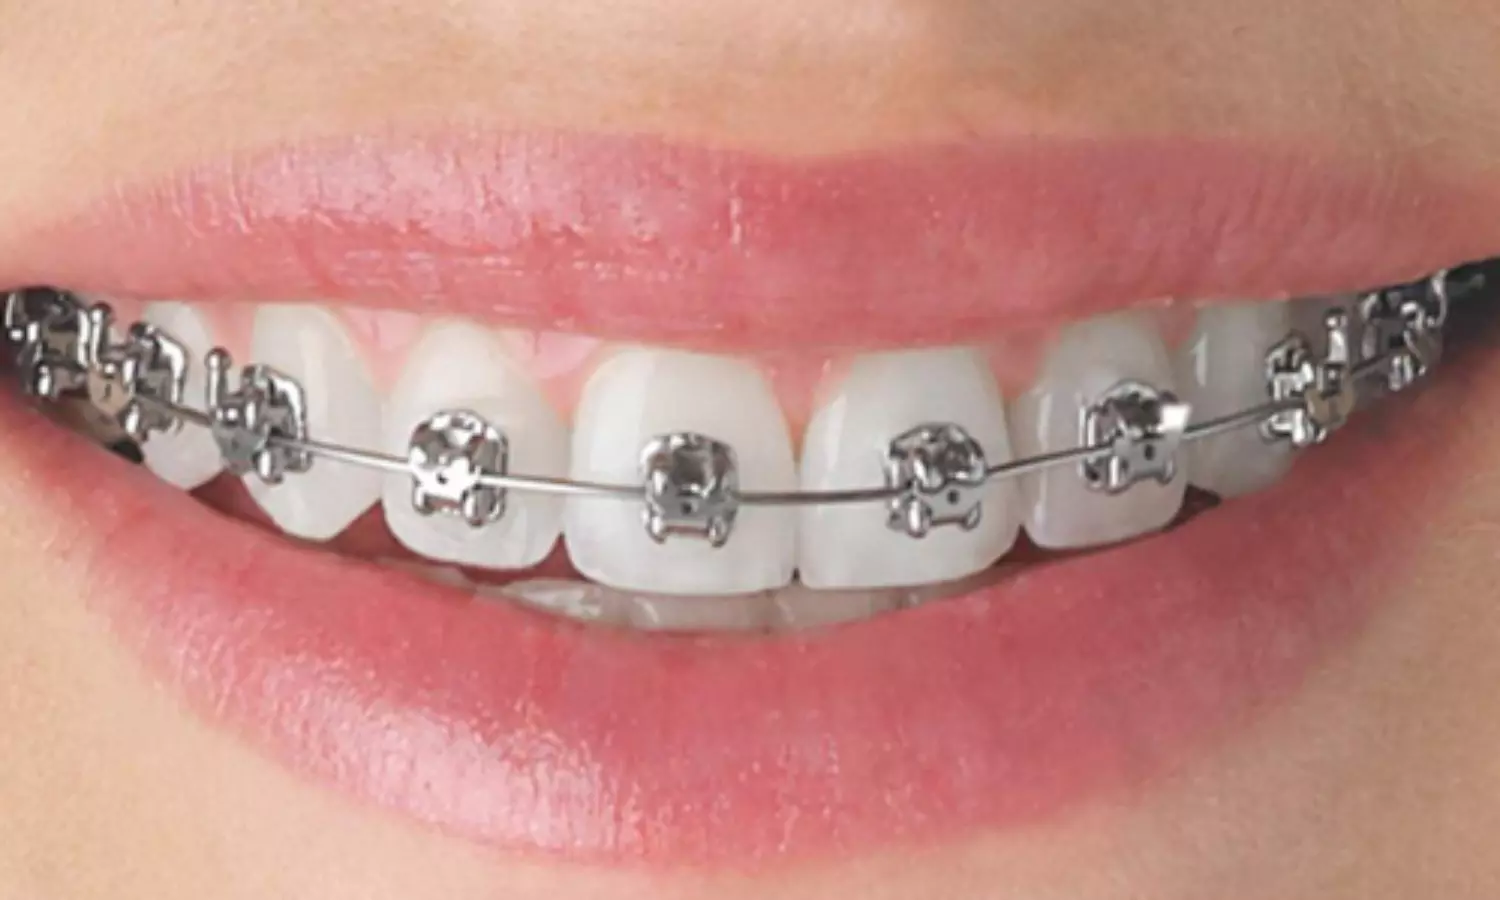 Remote digital monitoring effective in plaque control during orthodontic treatment: Study